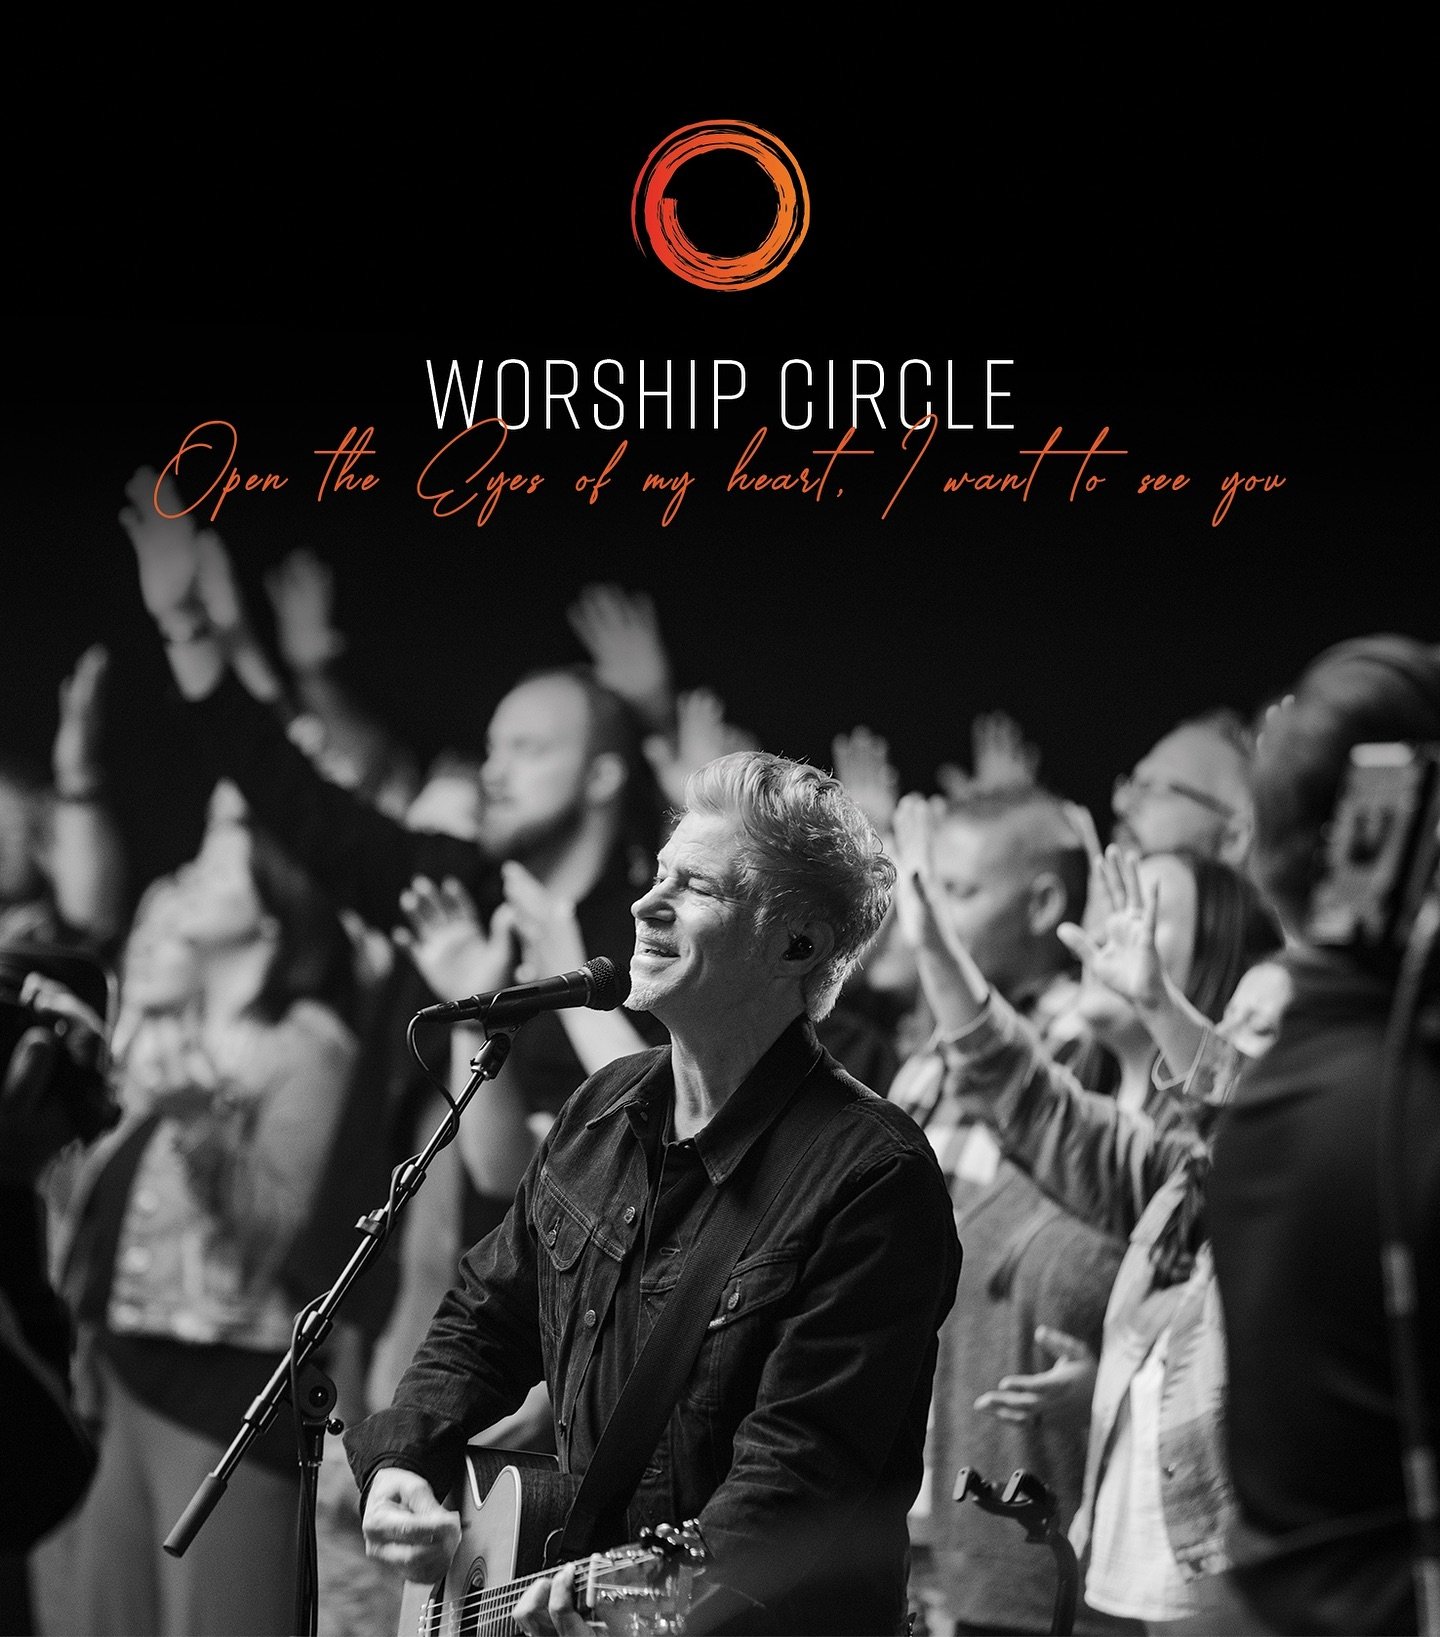 In 2000, a song of prayer and praise called &ldquo;Open the Eyes of My Heart&rdquo; made its way into our lives through our brother Paul Baloche. Over the years it&rsquo;s been a gift to all who are on the journey to follow Jesus..to those who long t